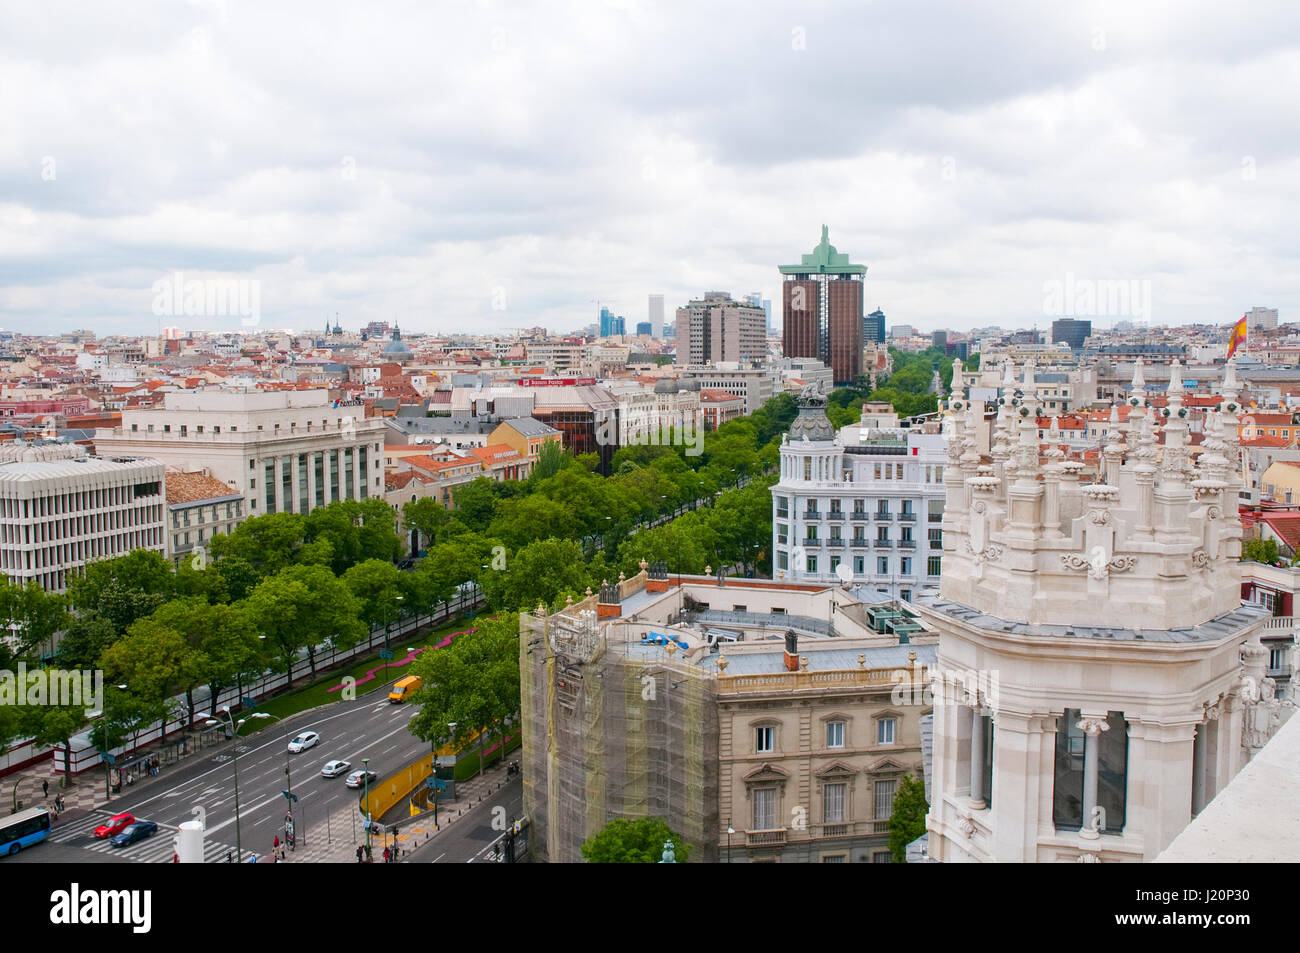 Paseo de Recoletos, view from above. Madrid, Spain. Stock Photo